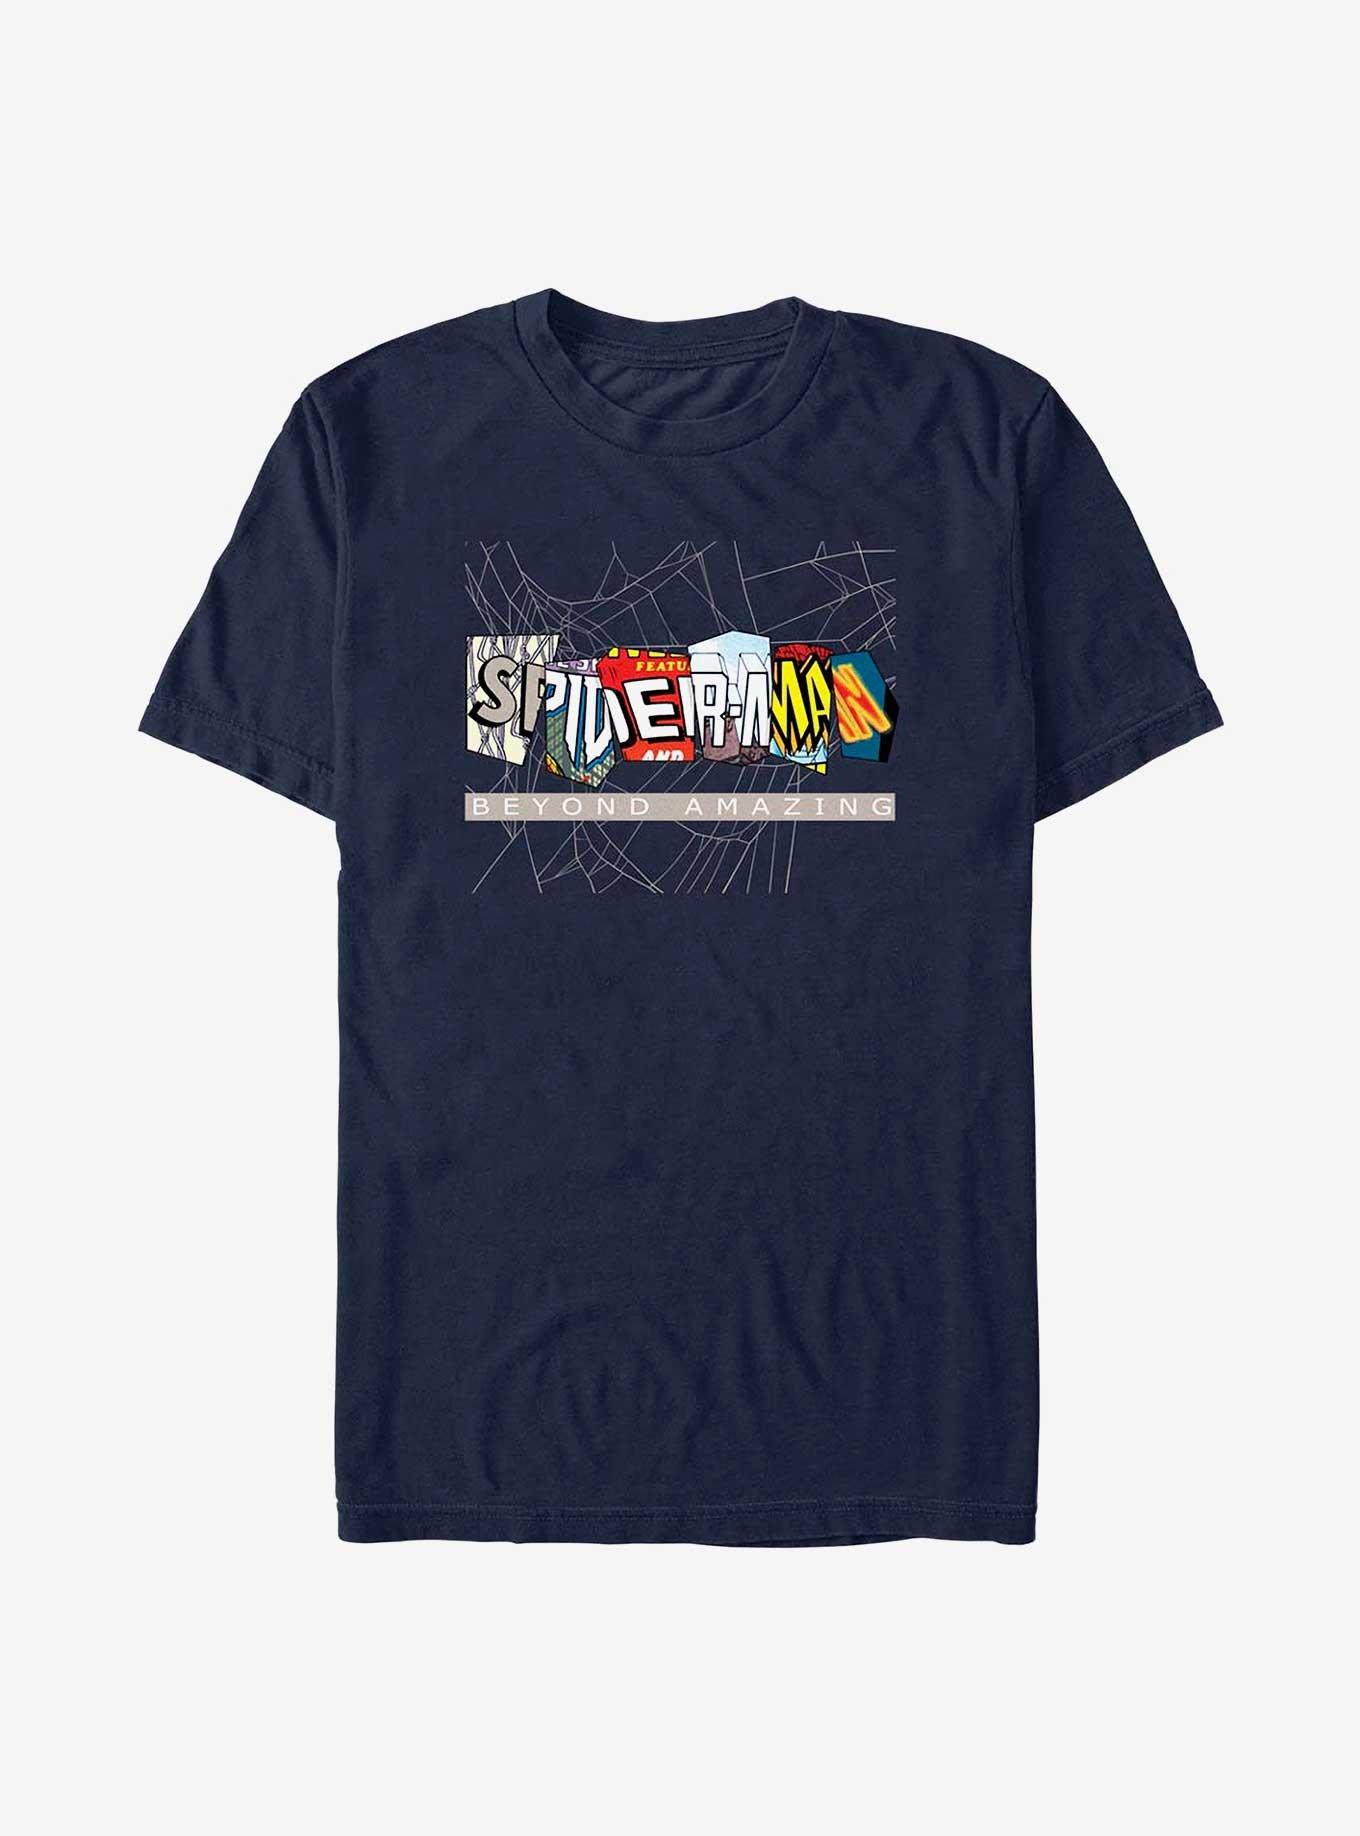 Marvel Spider-Man 60th Anniversary Comic Clippings Beyond Amazing Logo T-Shirt, NAVY, hi-res